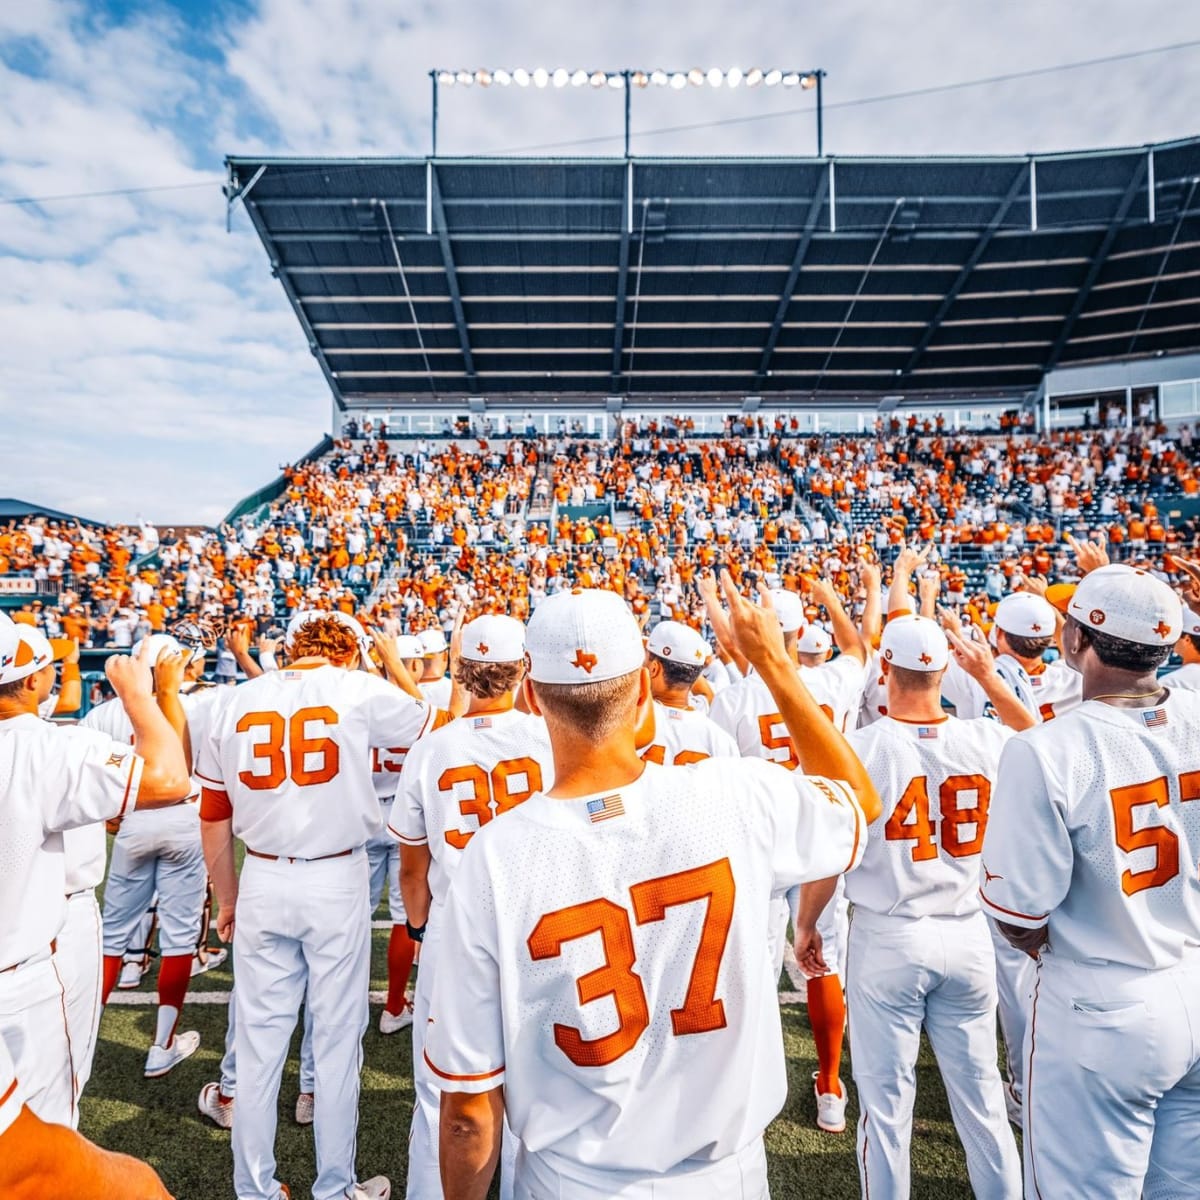 Tennessee Baseball: Vols crack top 25 after strong weekend showing